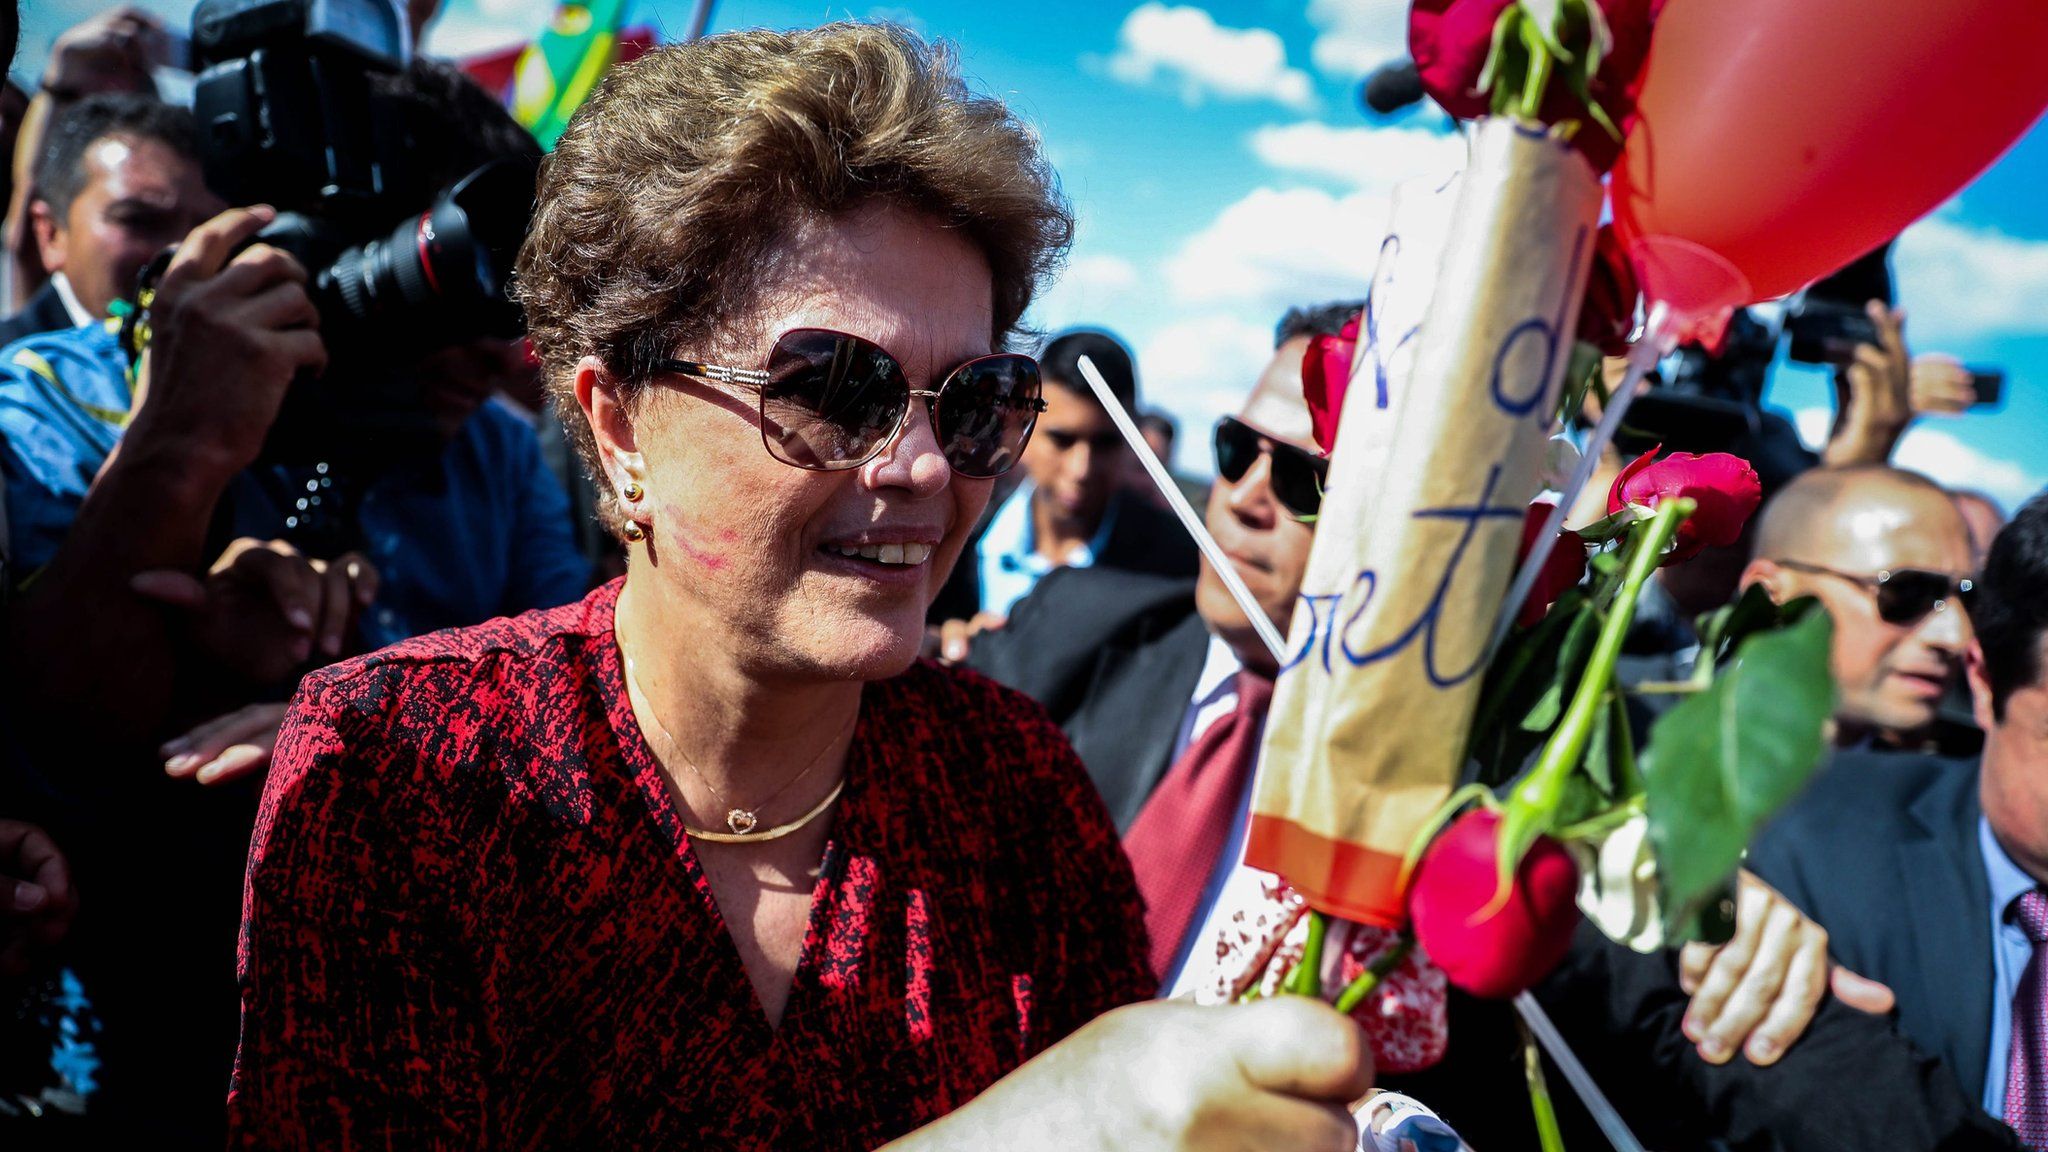 Dilma Rousseff receives flowers as she leaves Alvorada Palace in Brasilia. 6 Sept 2016